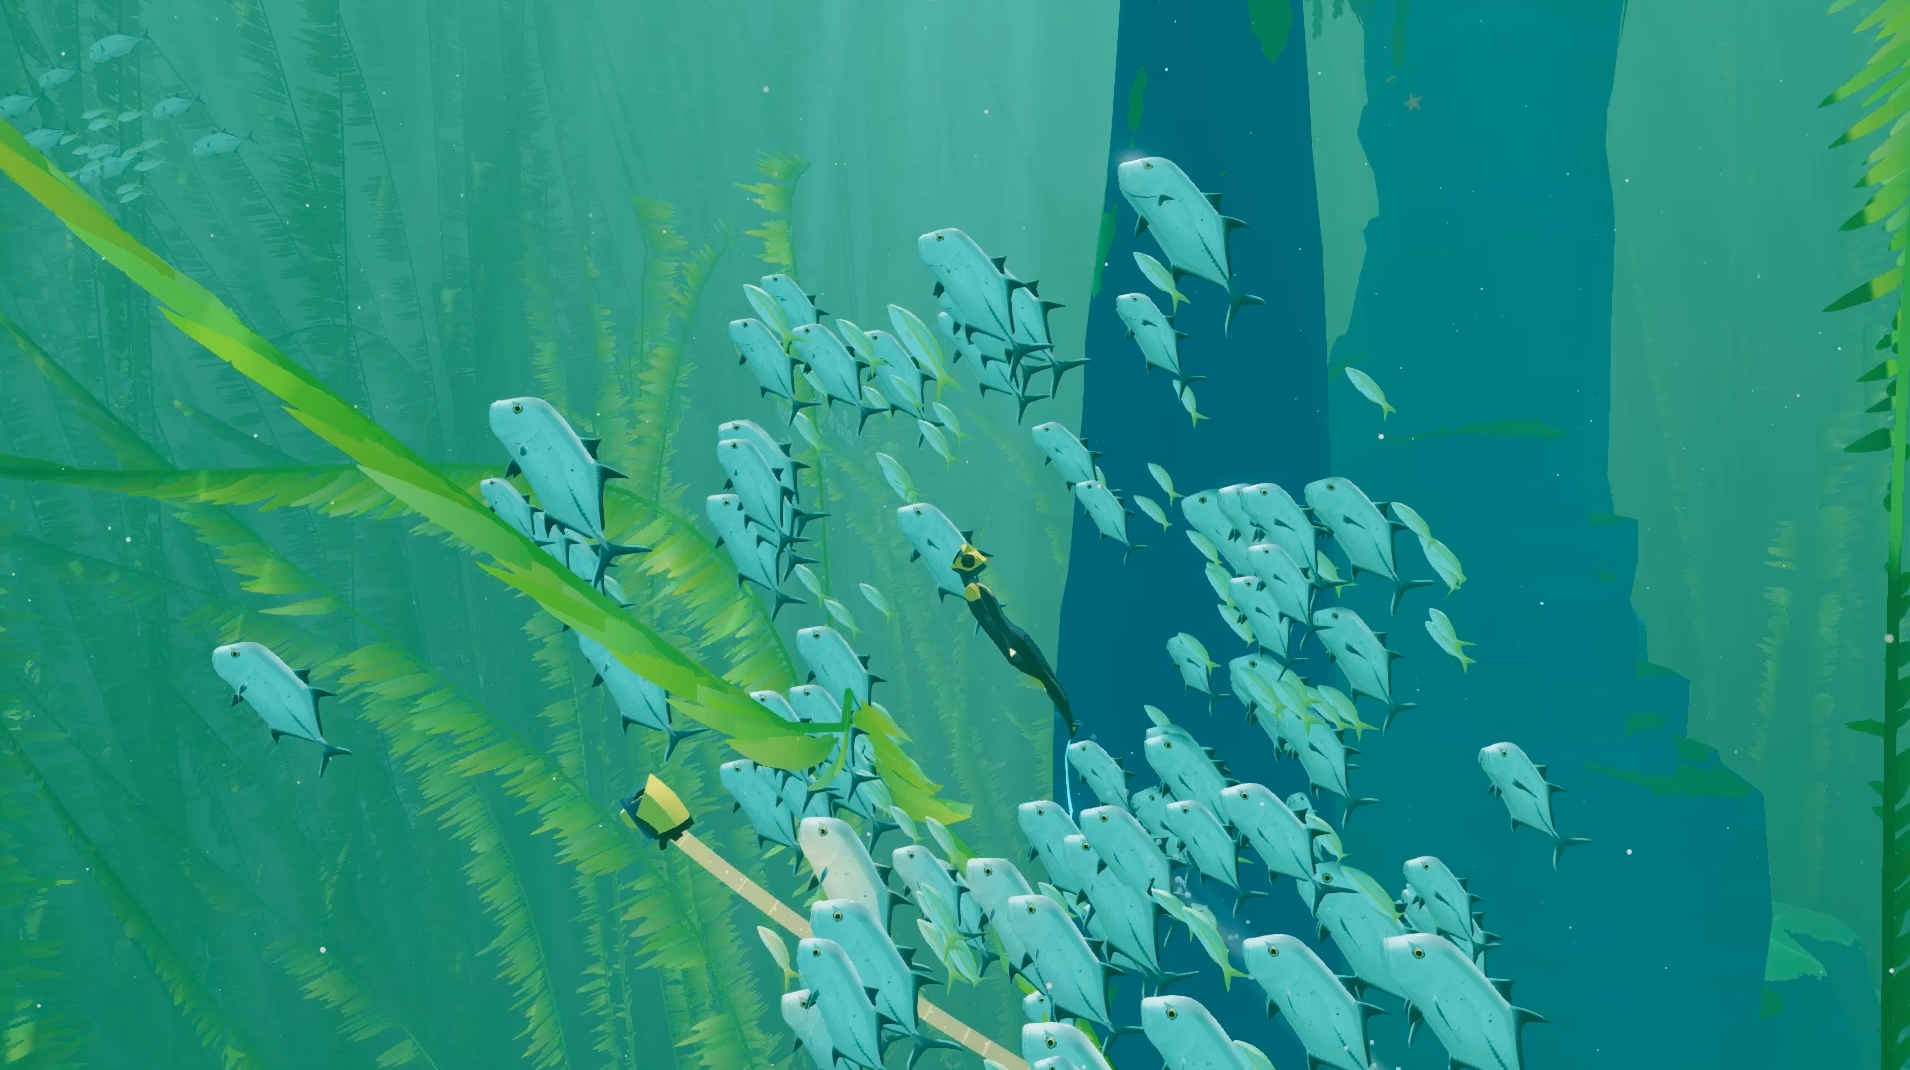 Swimming with schools of fish is as nice as it sounds.